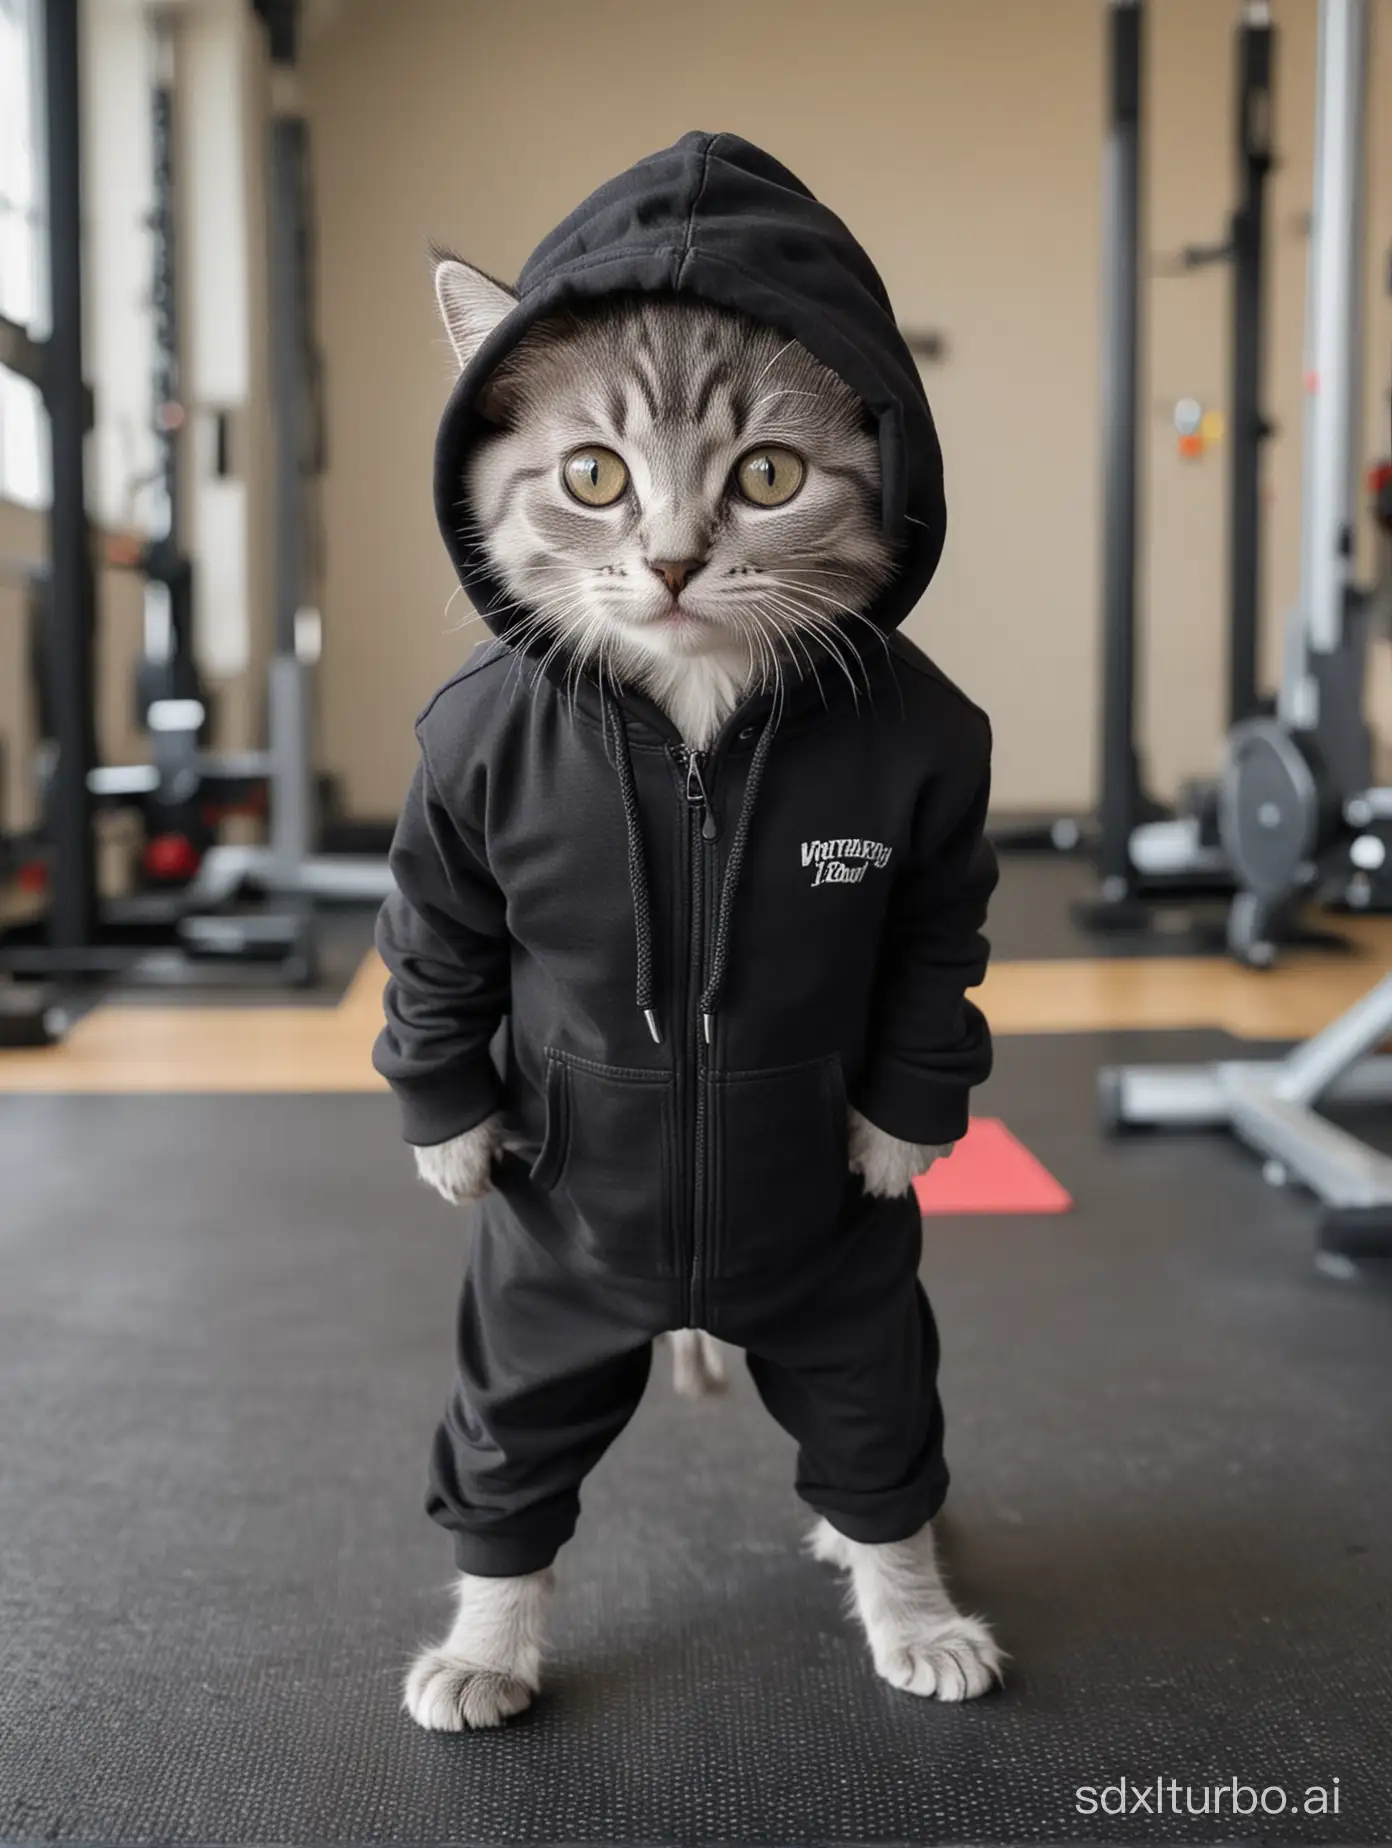 Adorable-Grey-Kitten-Working-Out-in-a-Black-Hoodie-Gym-Session